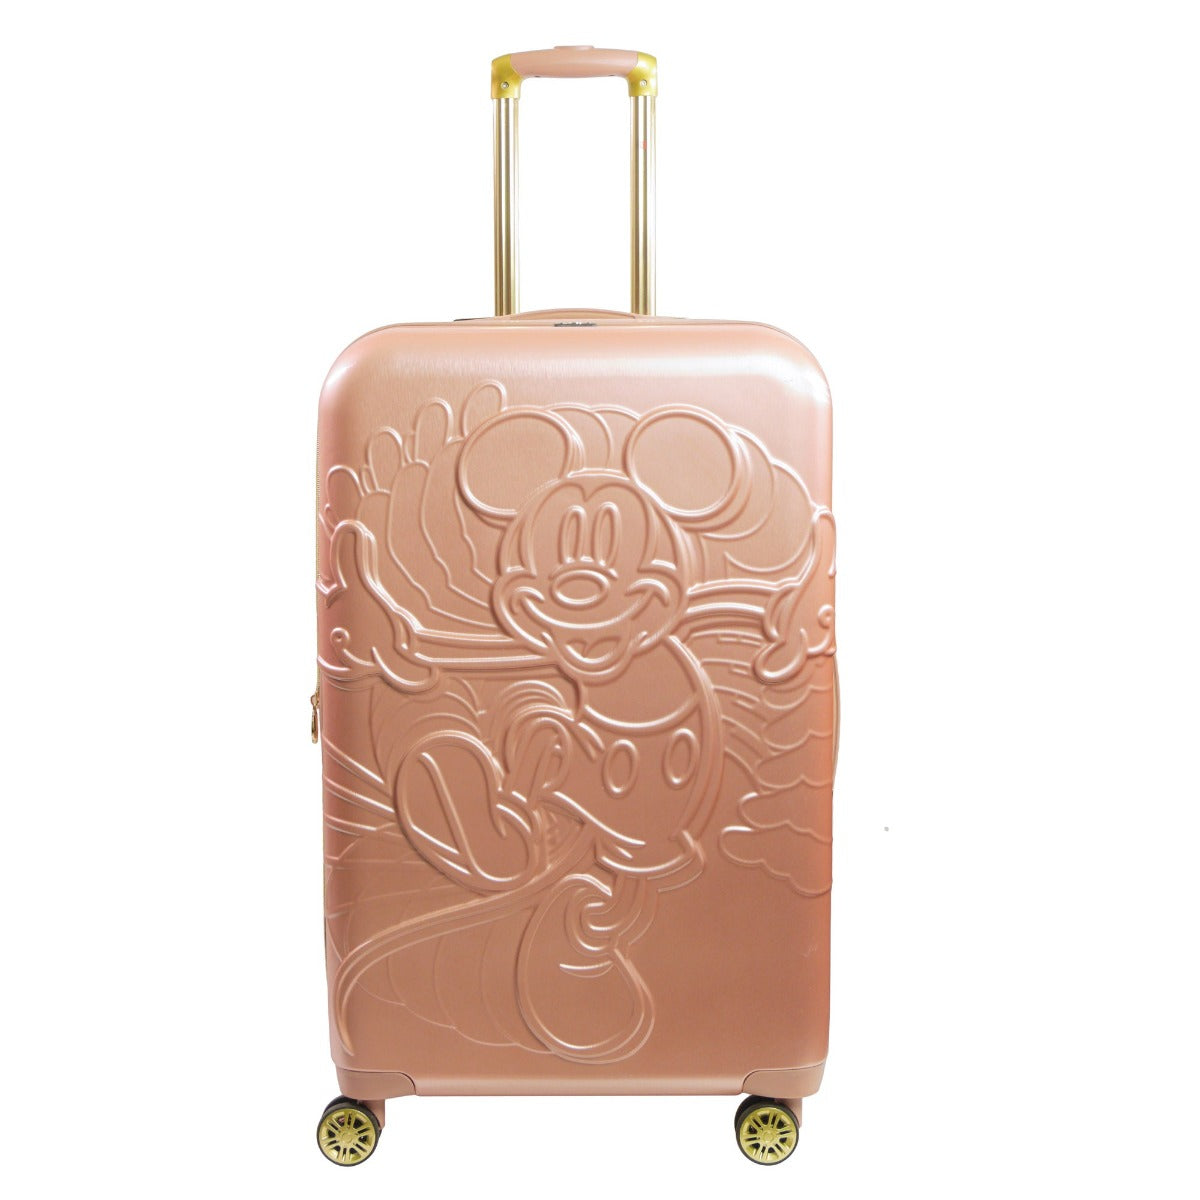 Disney Running Mickey 30.5 inch hardsided Spinner Suitcase Rose Gold Pink checked luggage 